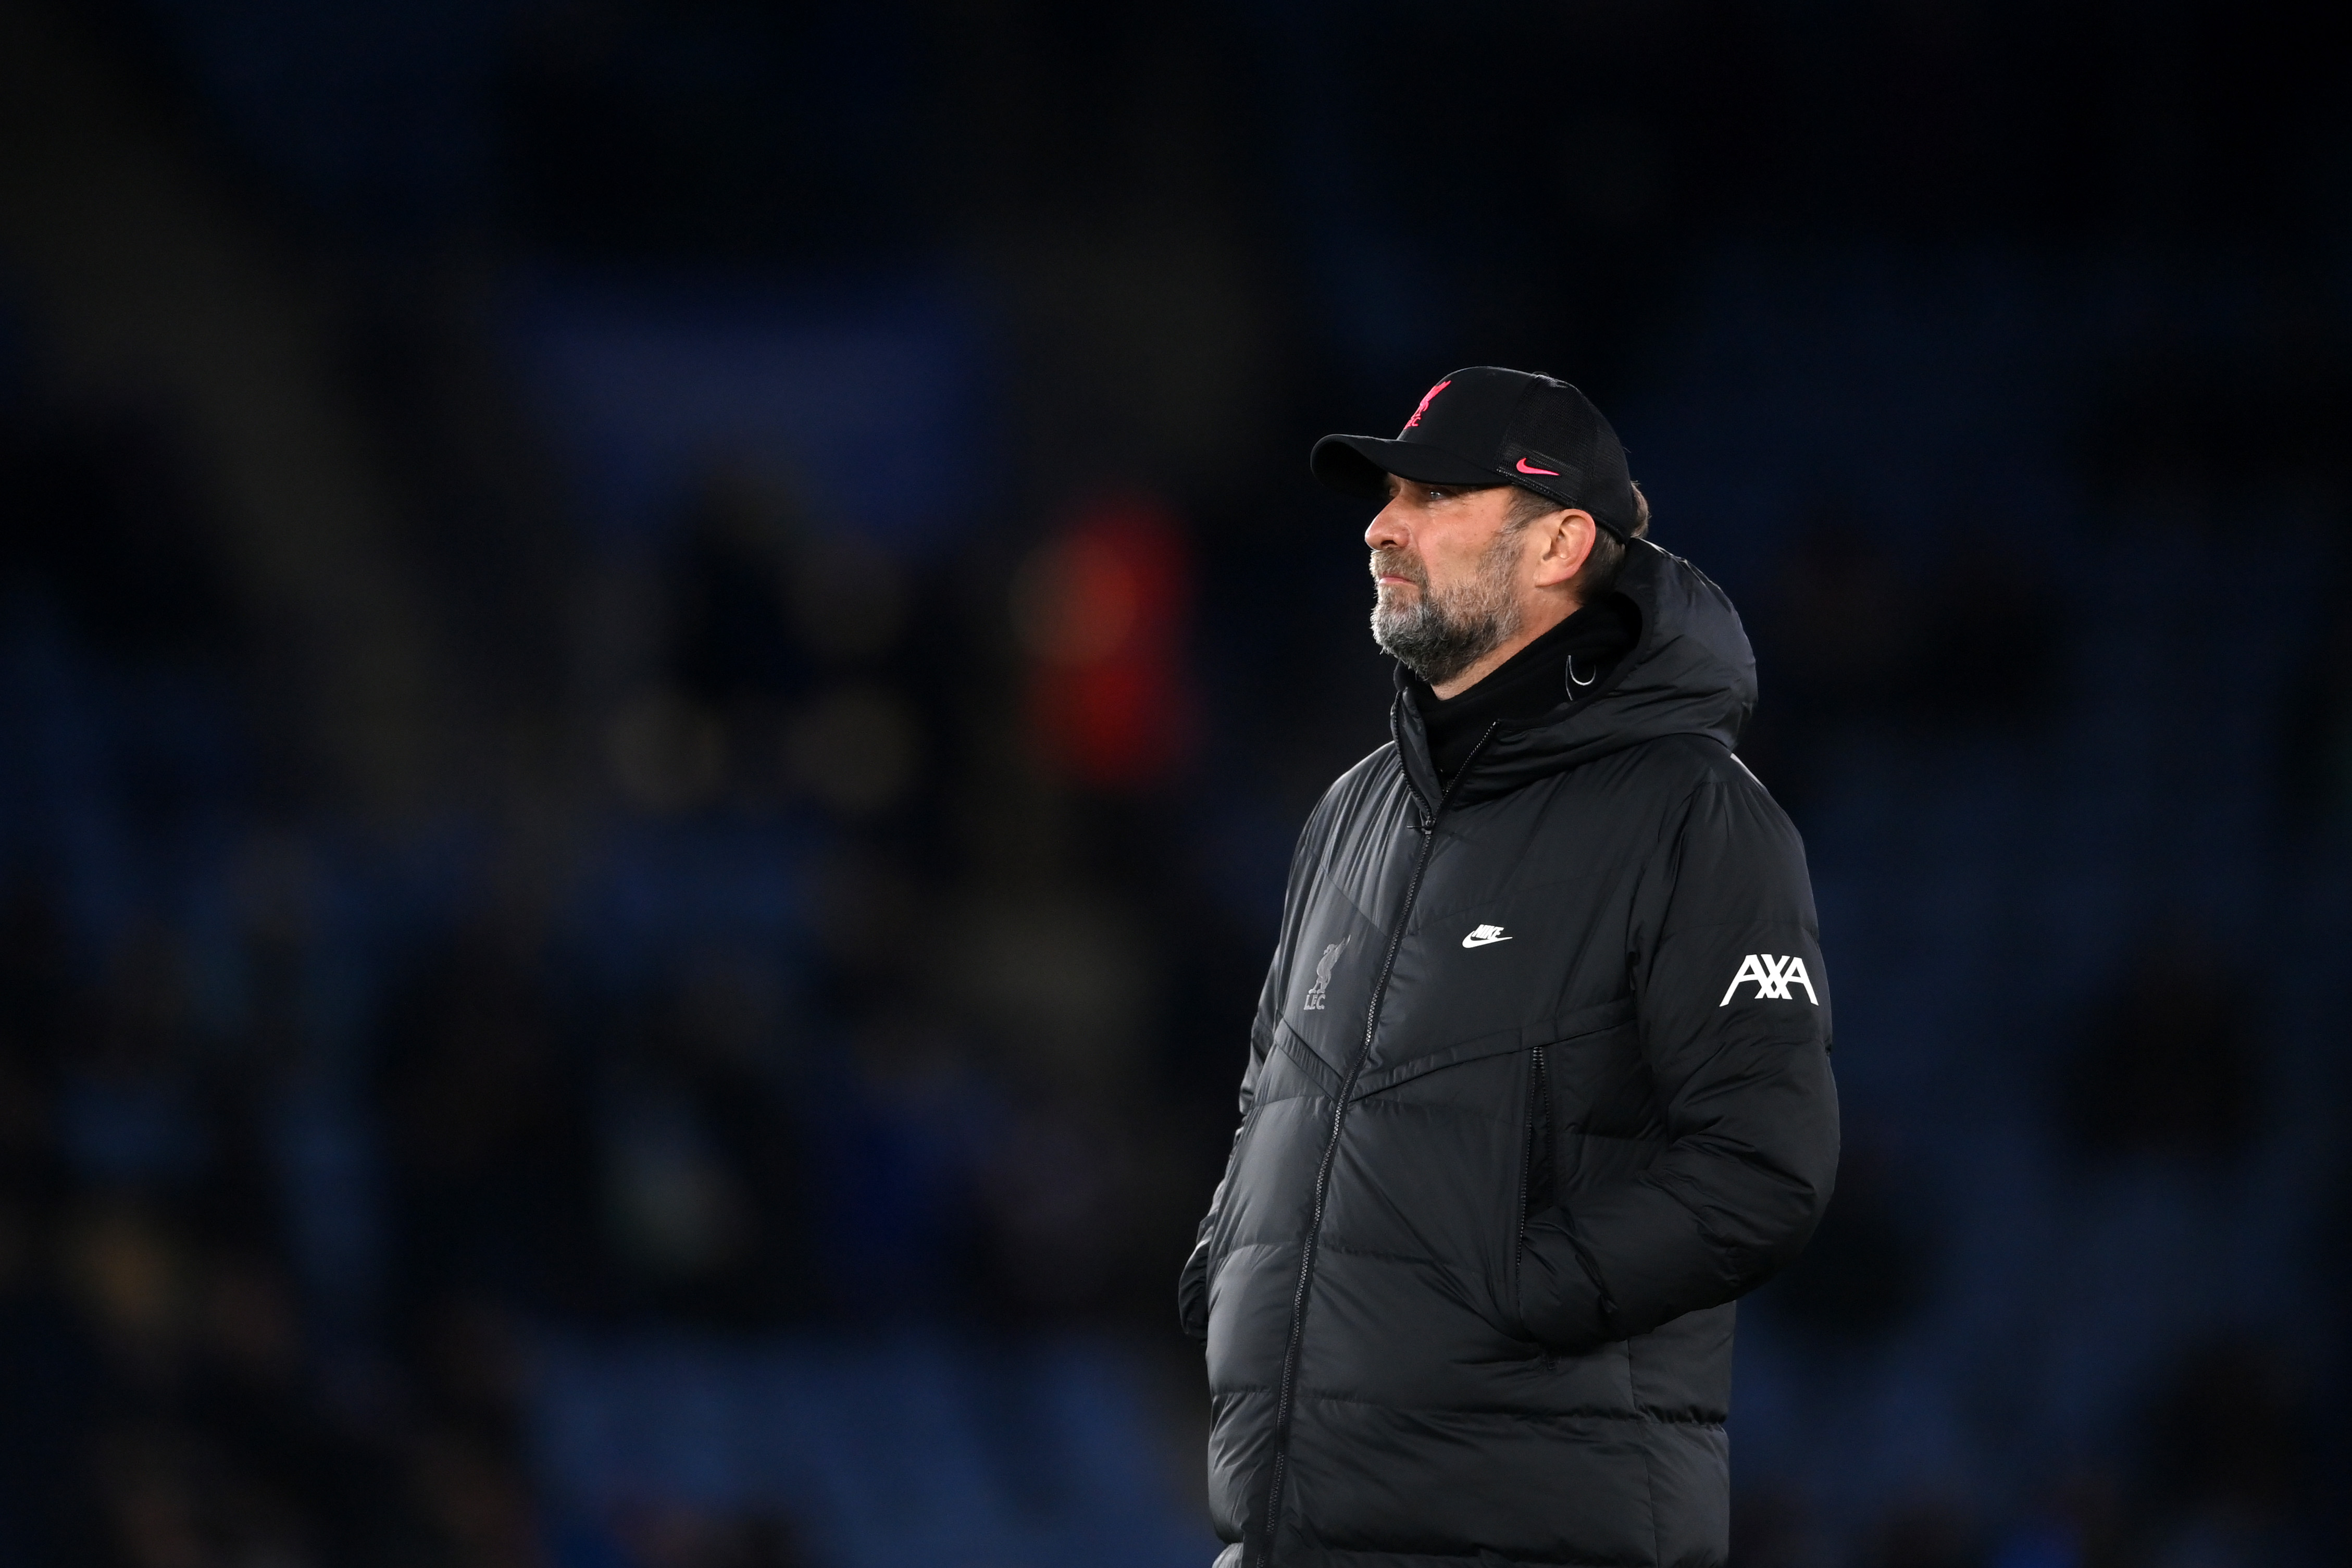 Editor’s Column: Without Klopp’s Reds, the Premier League would be Bundesliga-esque and utterly dull – so why does he get so much hate?